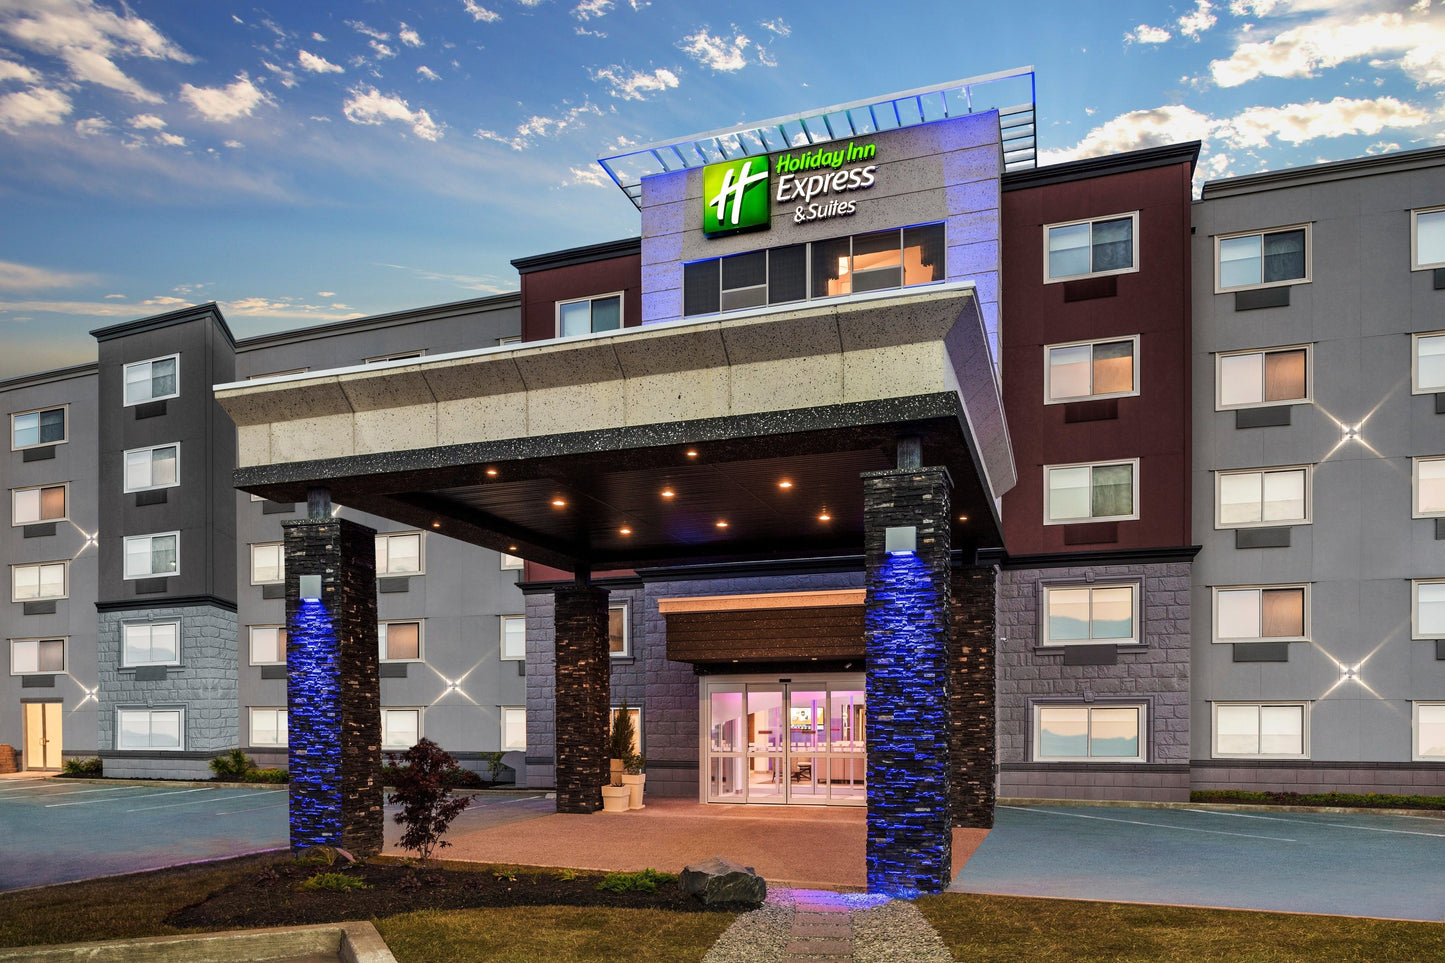 Hotel Review: Holiday Inn Express & Suites Halifax (Reviews, Pricing & Amenities)